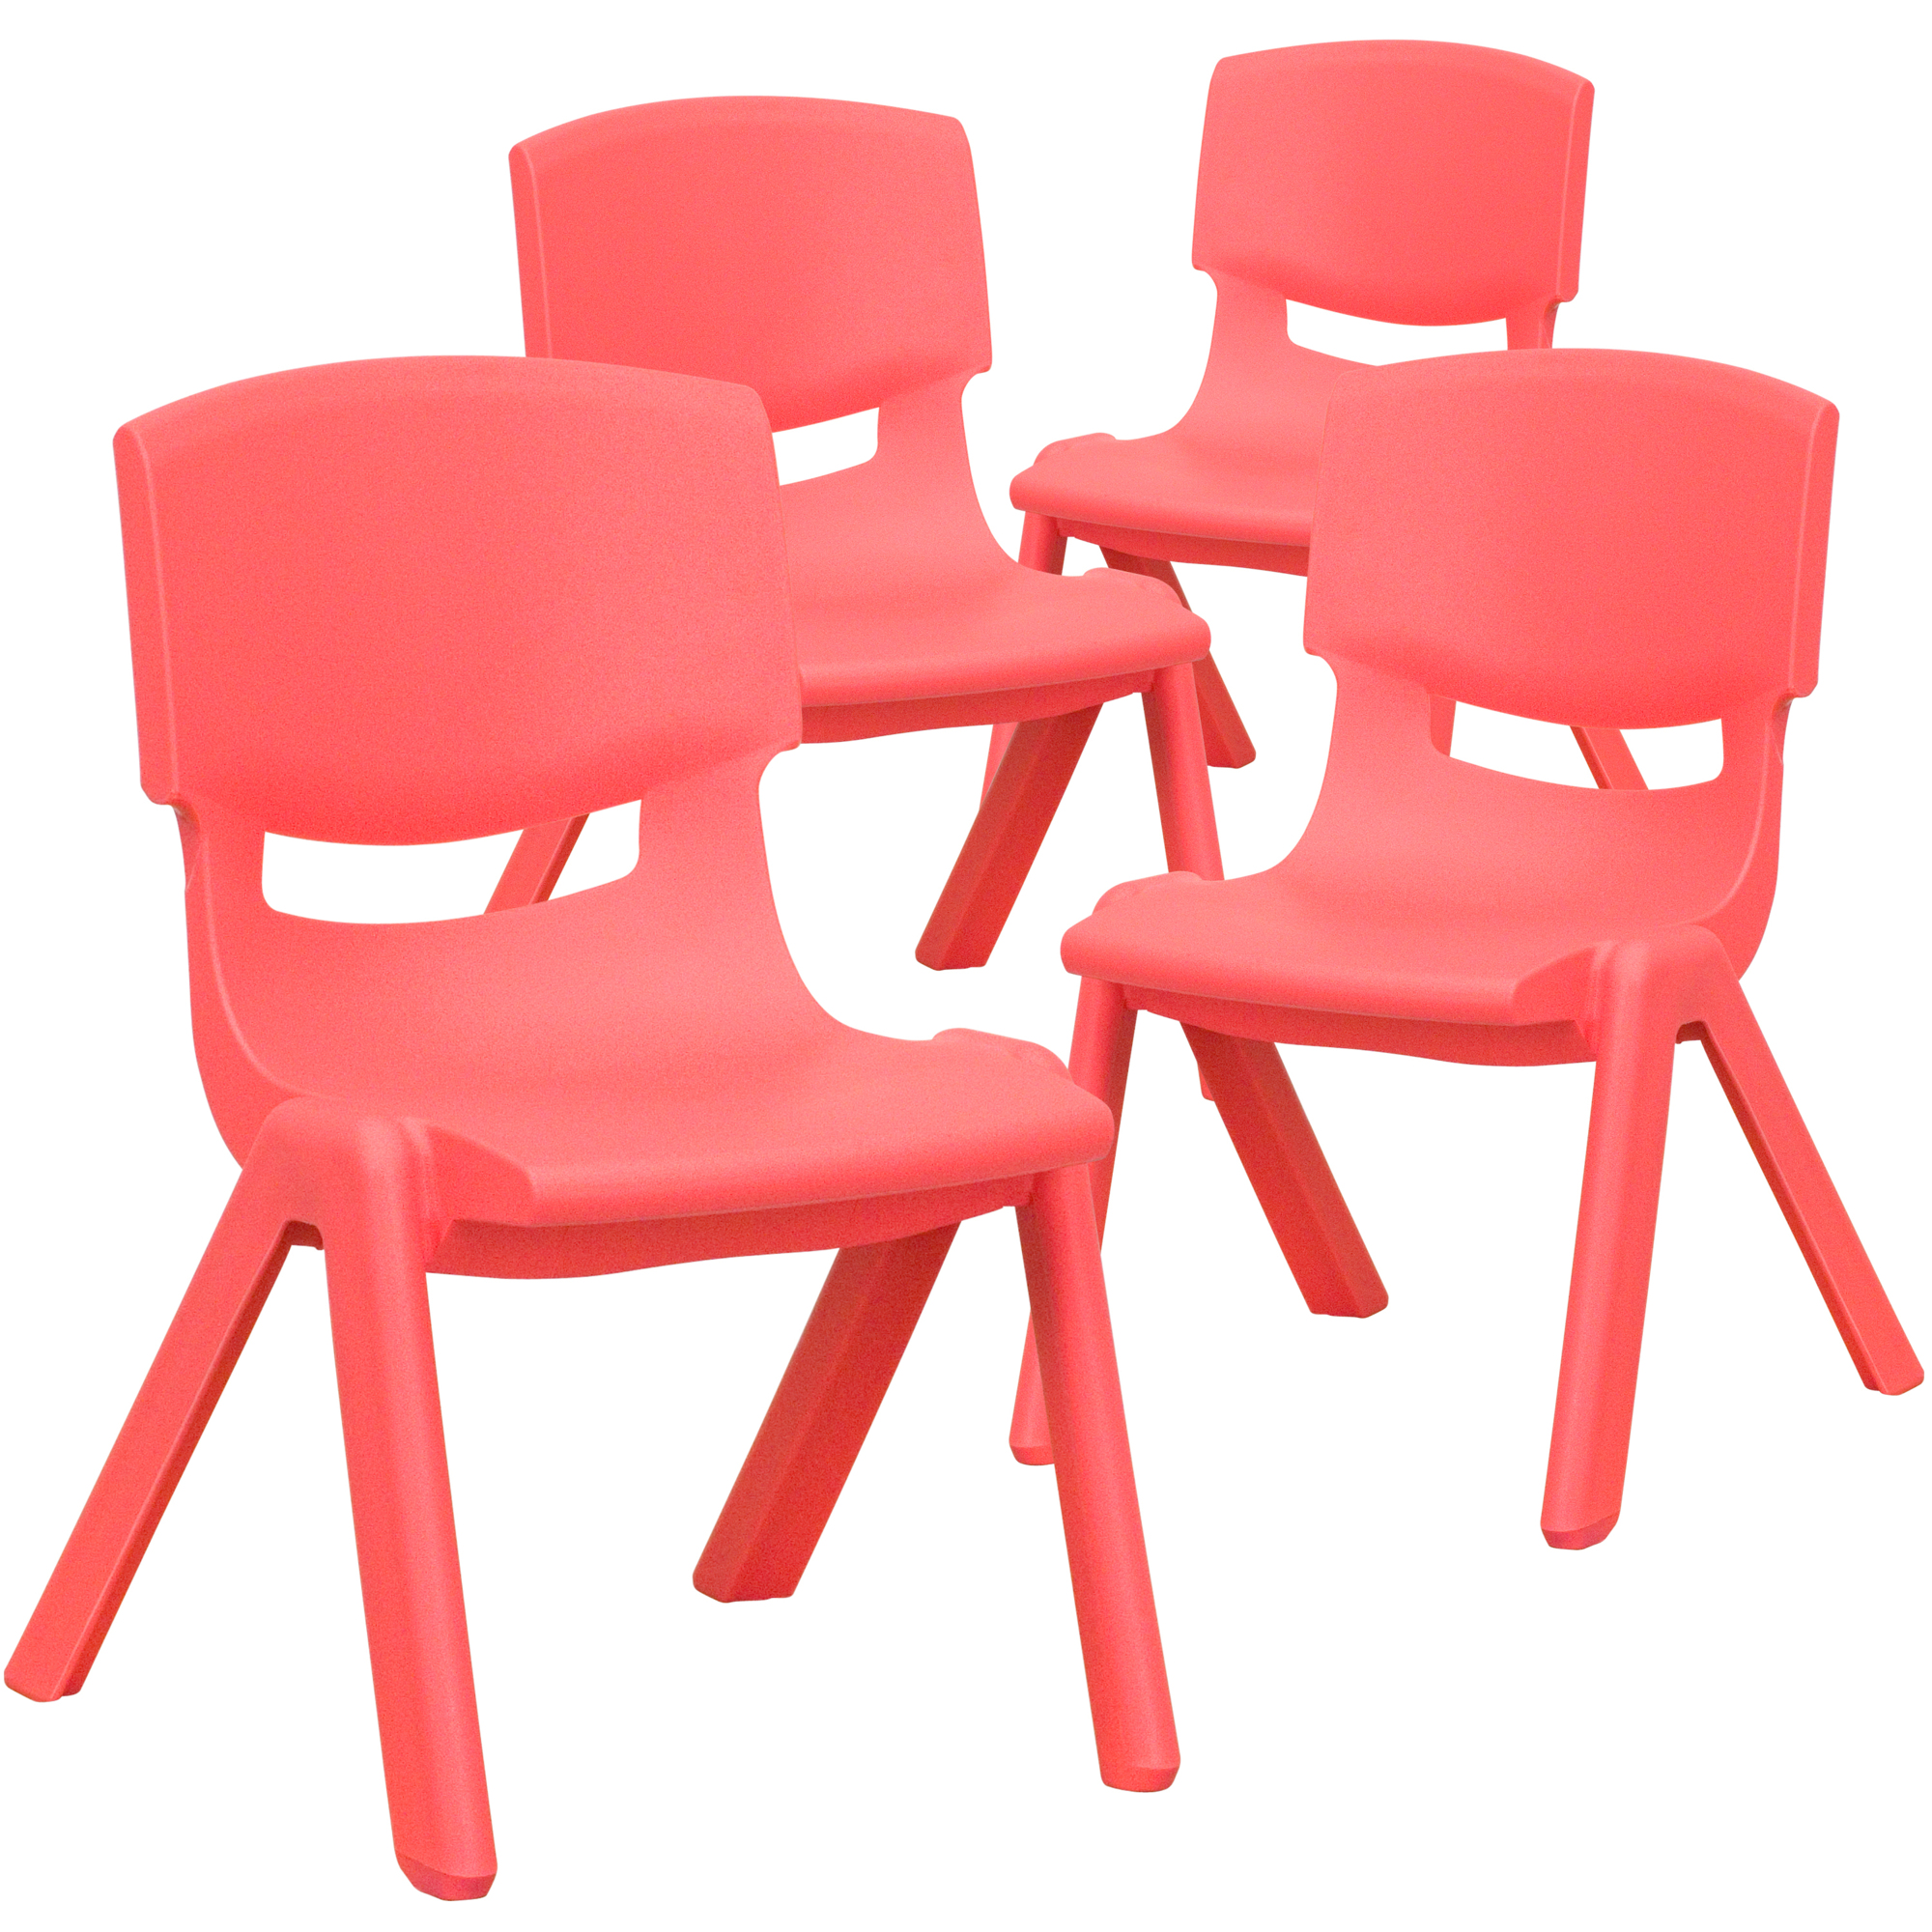 Flash Furniture, 4 Pack Red Plastic School Chair-10.5Inch H Seat, Primary Color Red, Included (qty.) 4, Model 4YUYCX4003RED